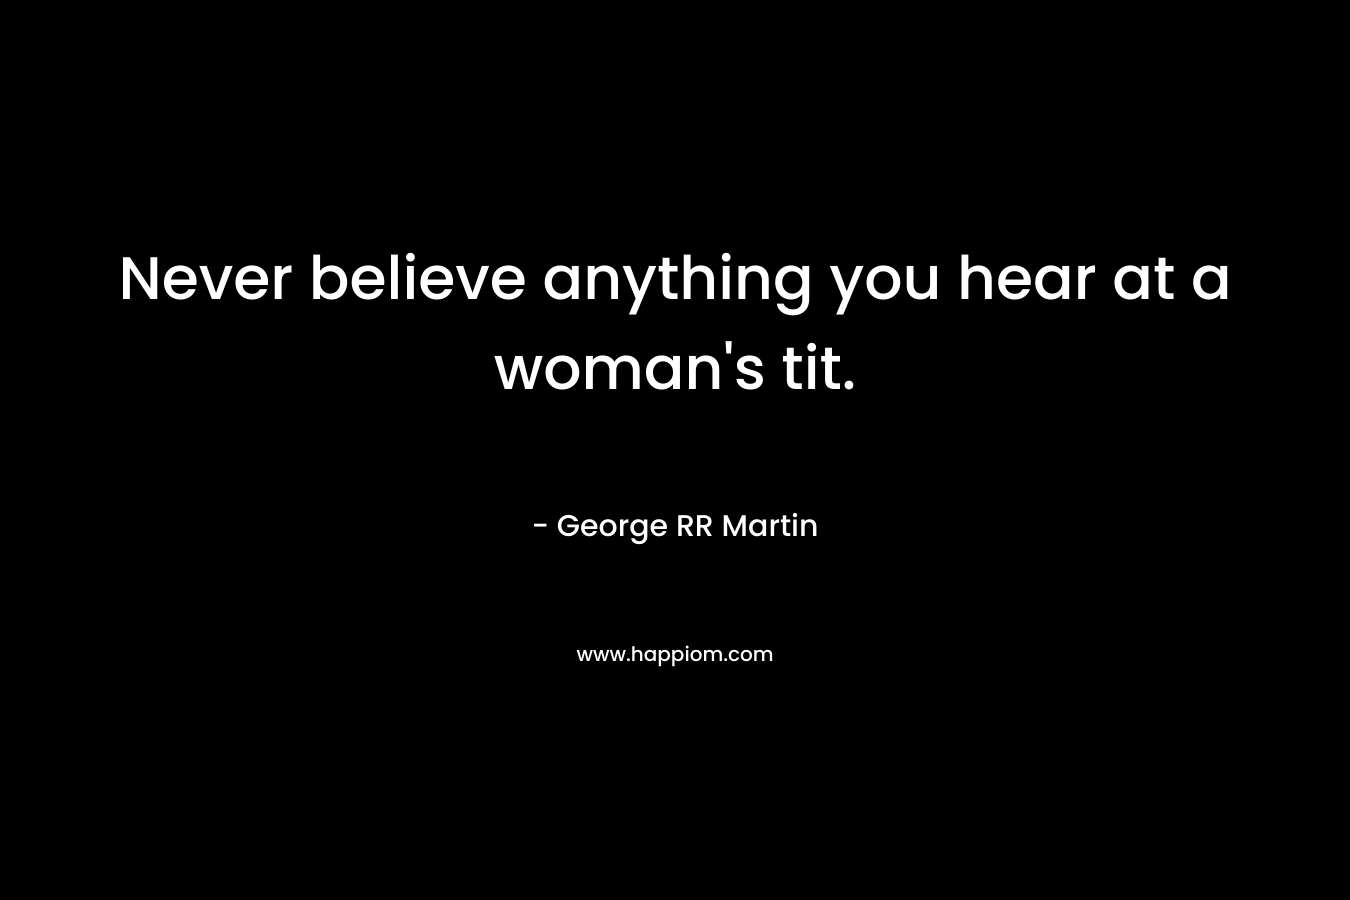 Never believe anything you hear at a woman's tit.